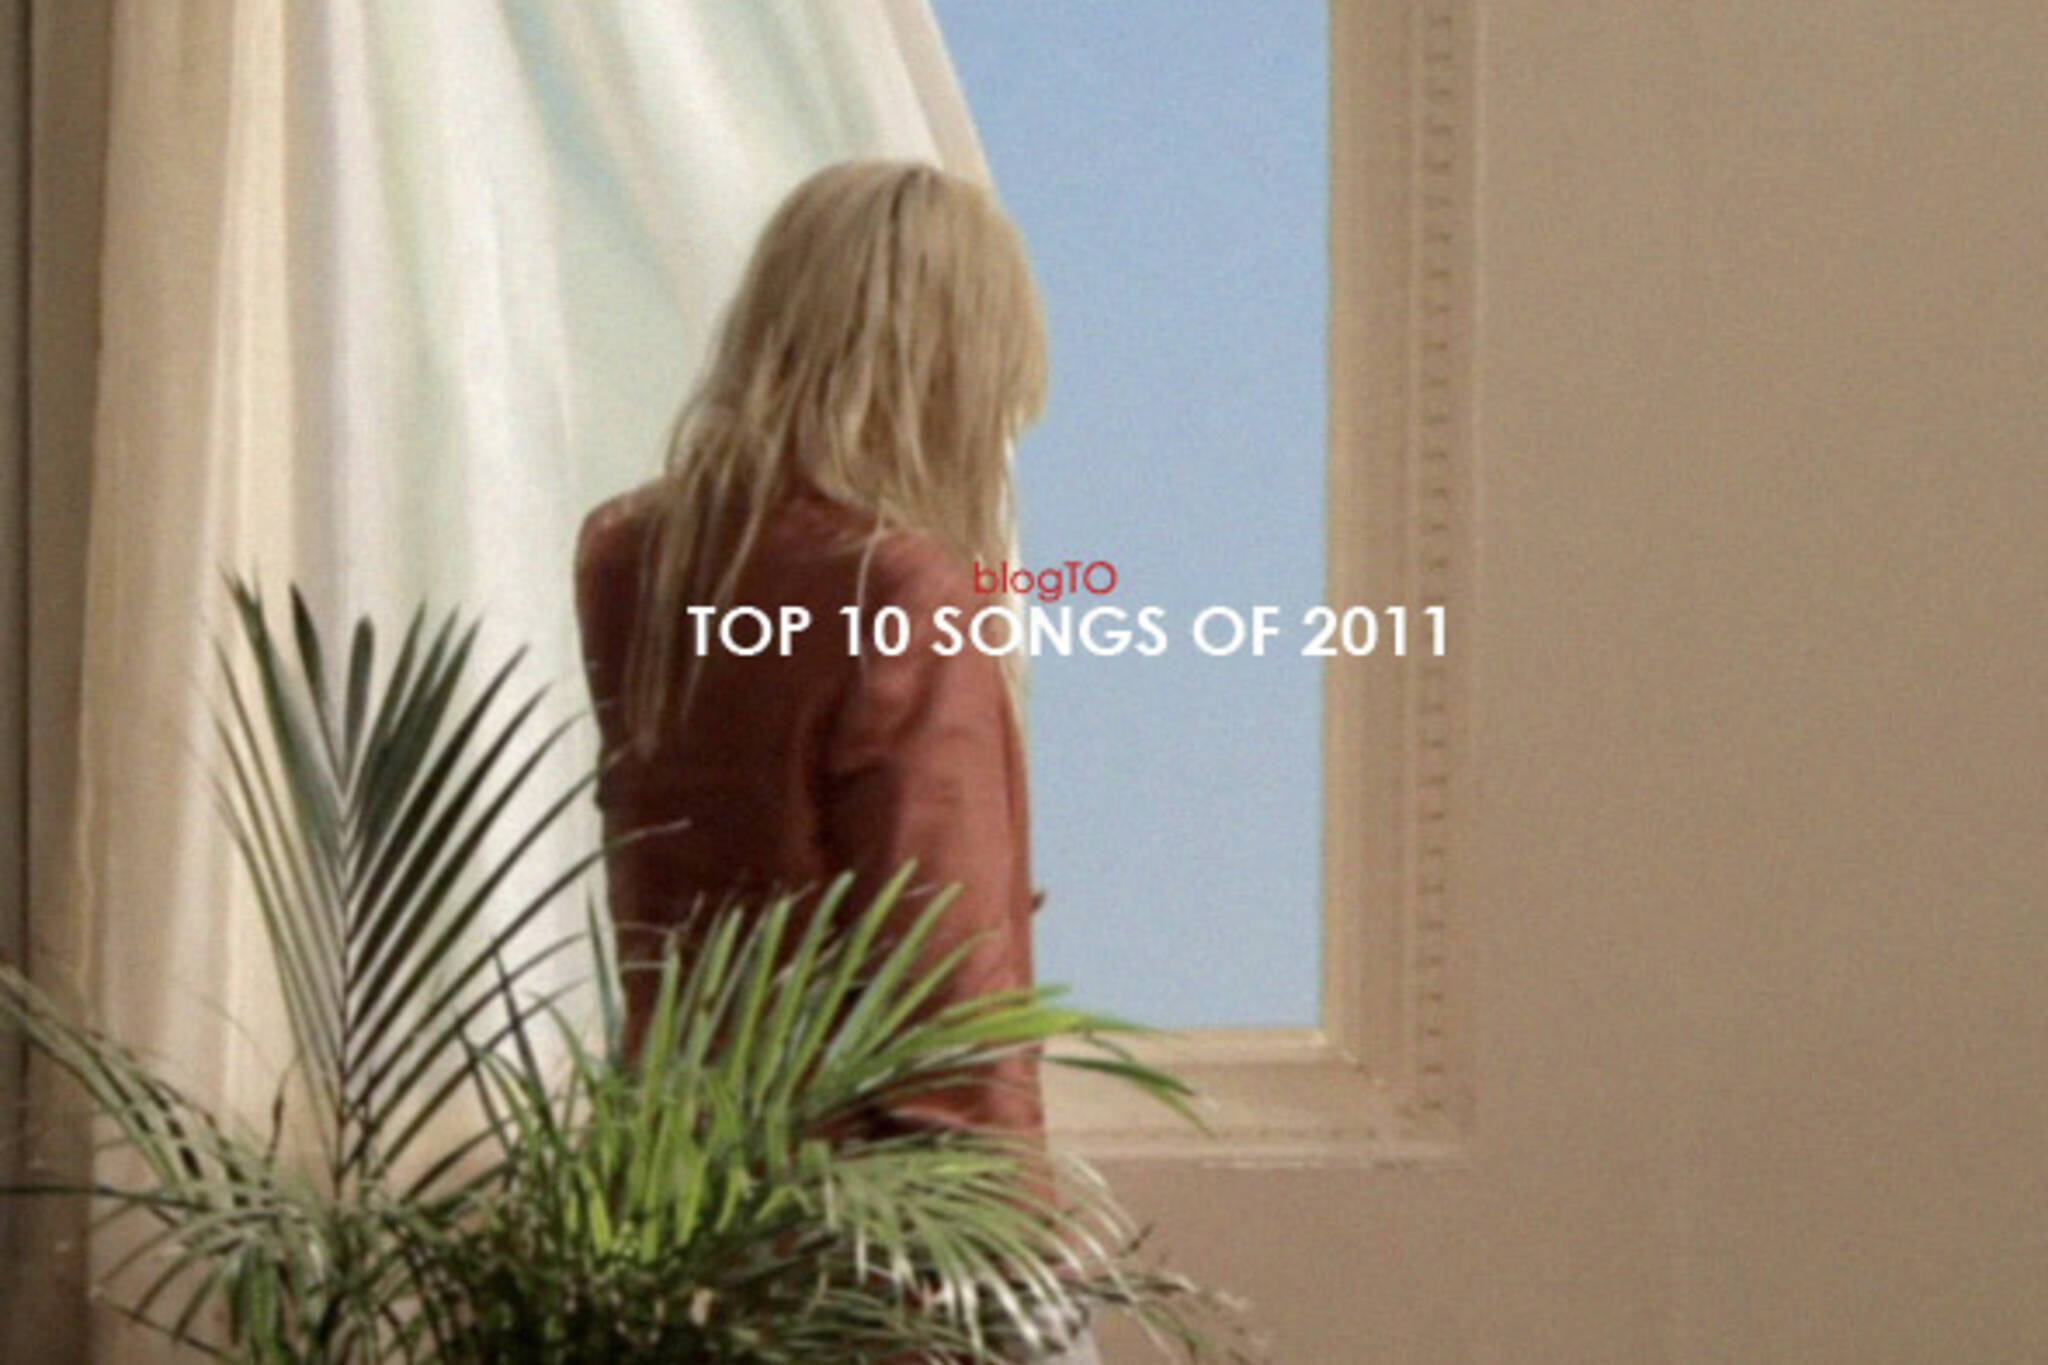 Top 10 Songs from Toronto bands in 2011